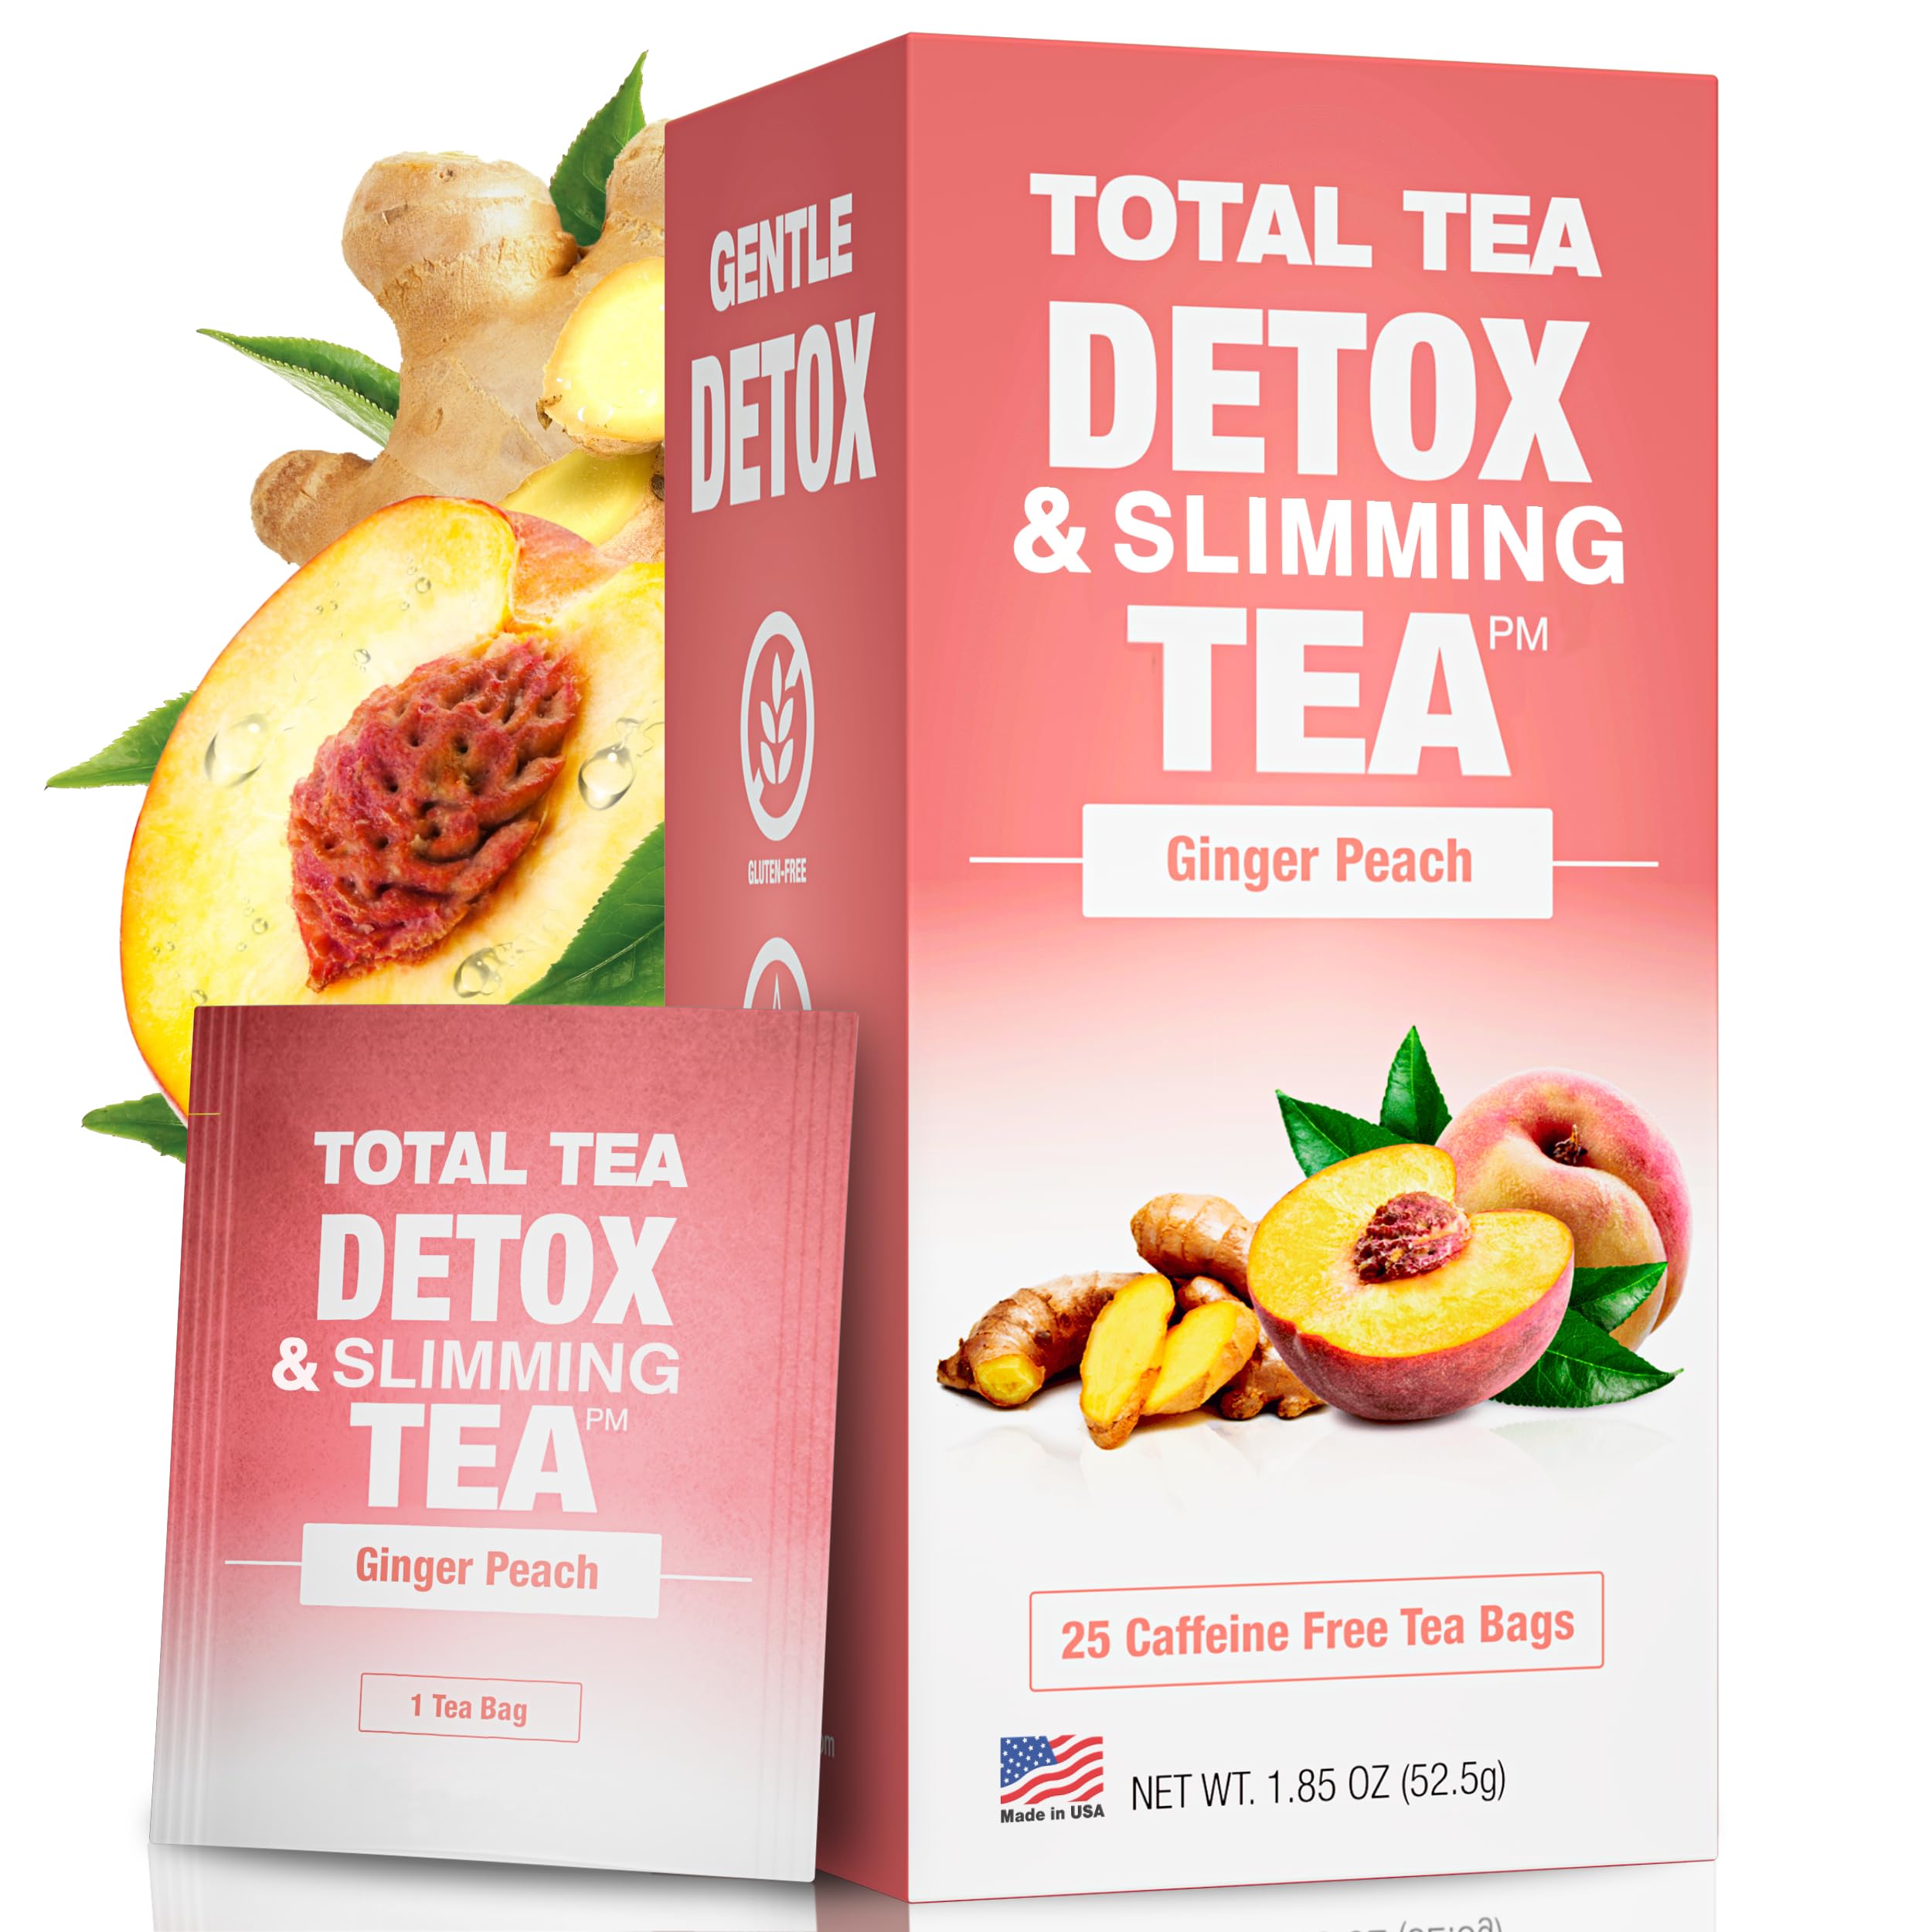 Chaflix - Catherine Herbal Slimming Weight Loss Tea